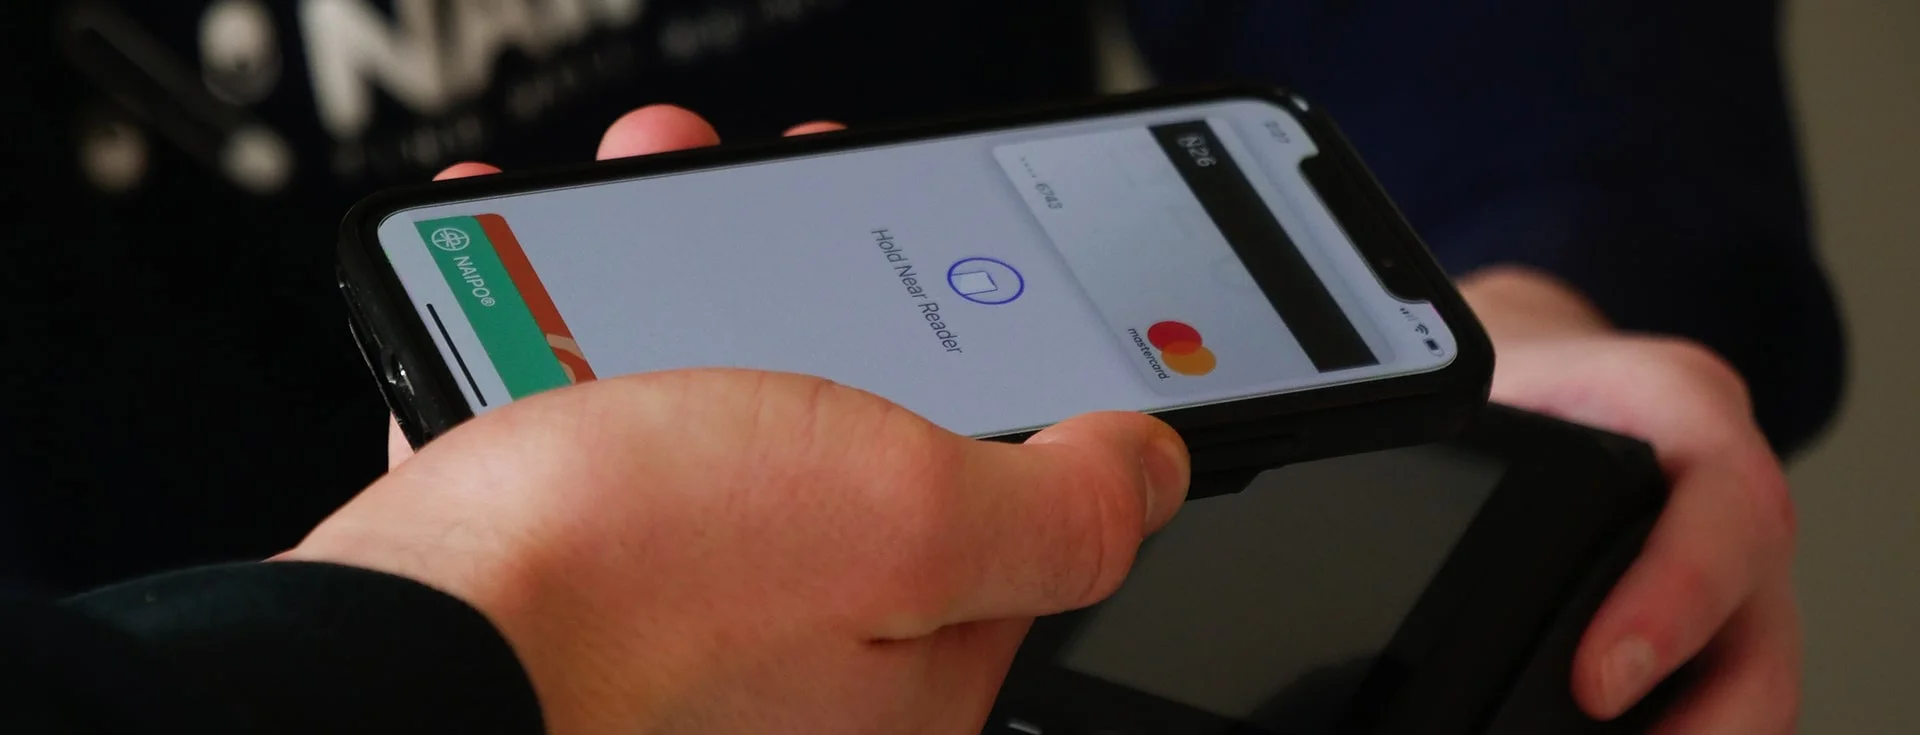 Apple Pay Later Now Available on Limited Basis. Buy Now and Pay Later With an Apple Loan